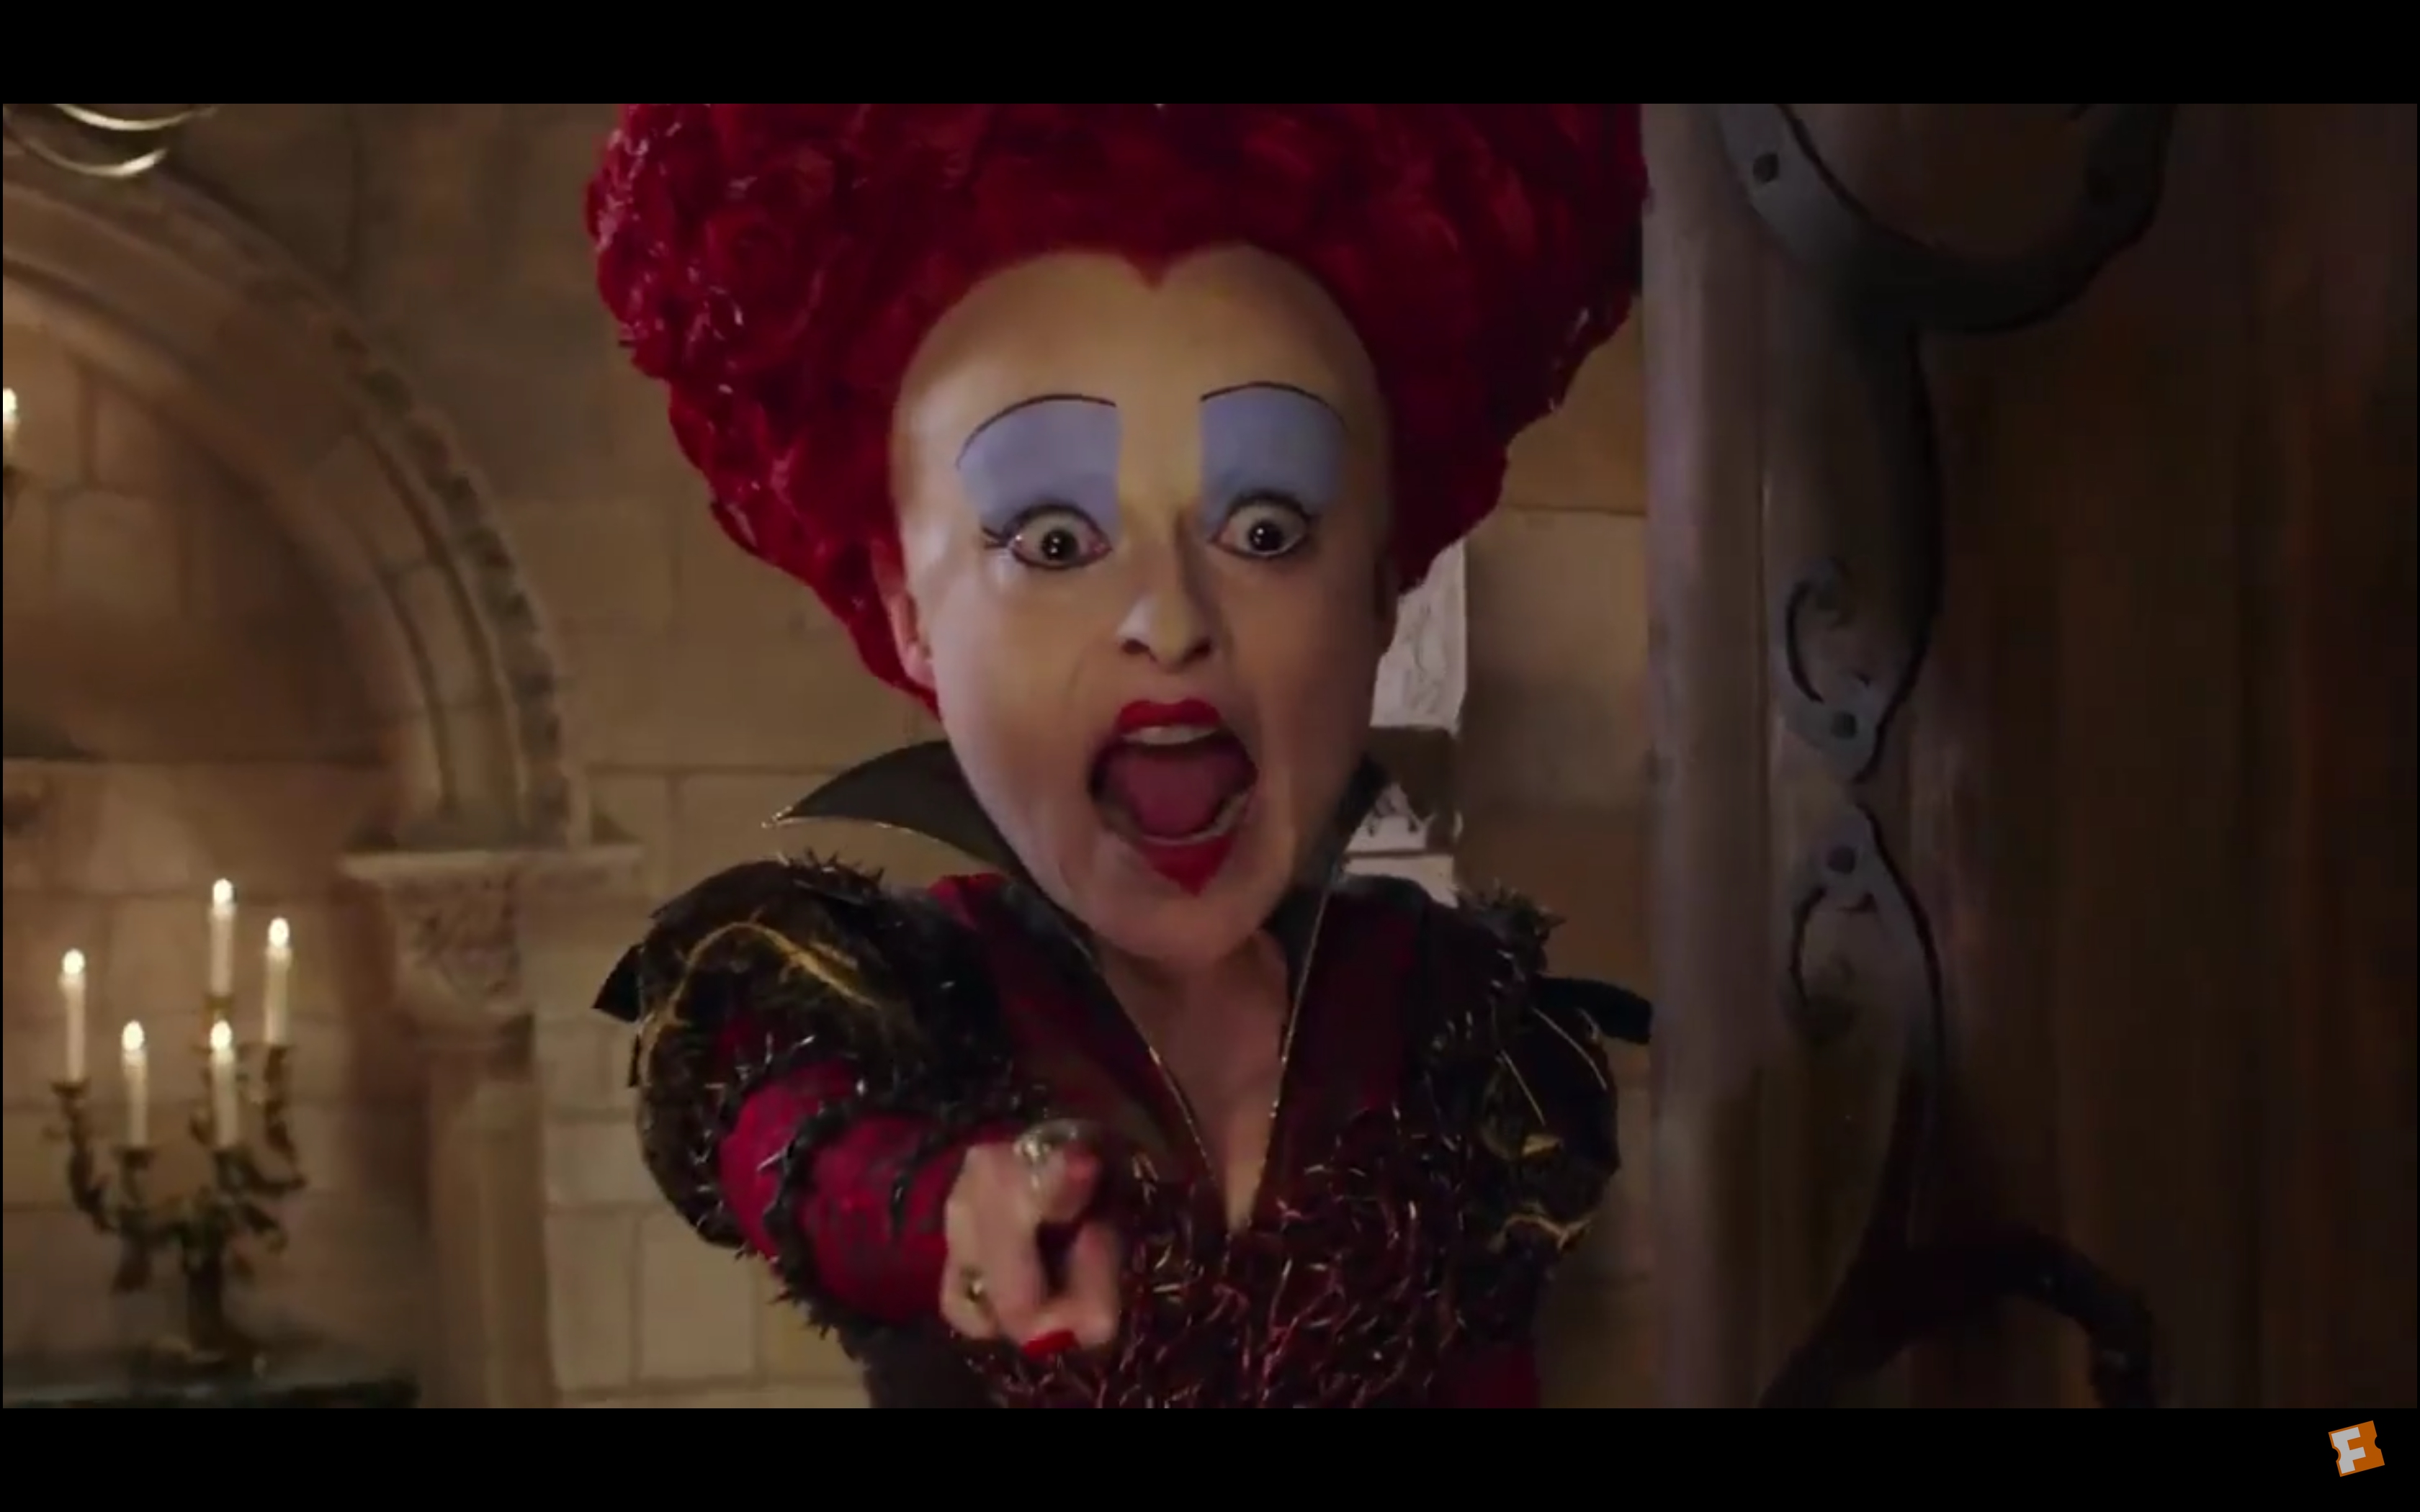 watch alice through the looking glass 2106